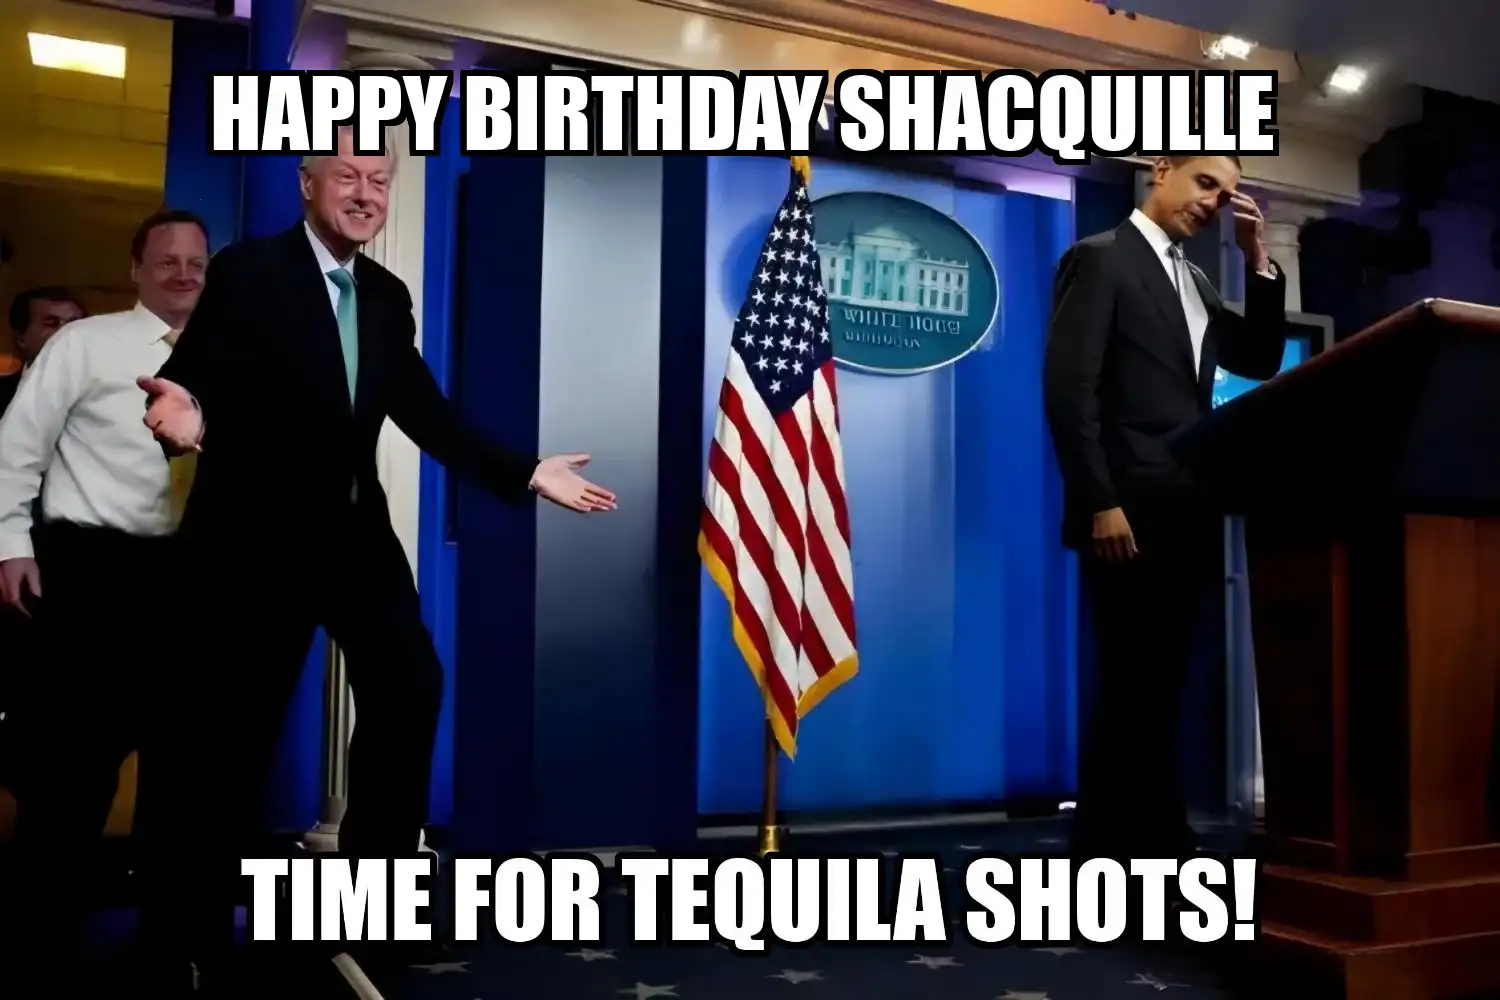 Happy Birthday Shacquille Time For Tequila Shots Memes